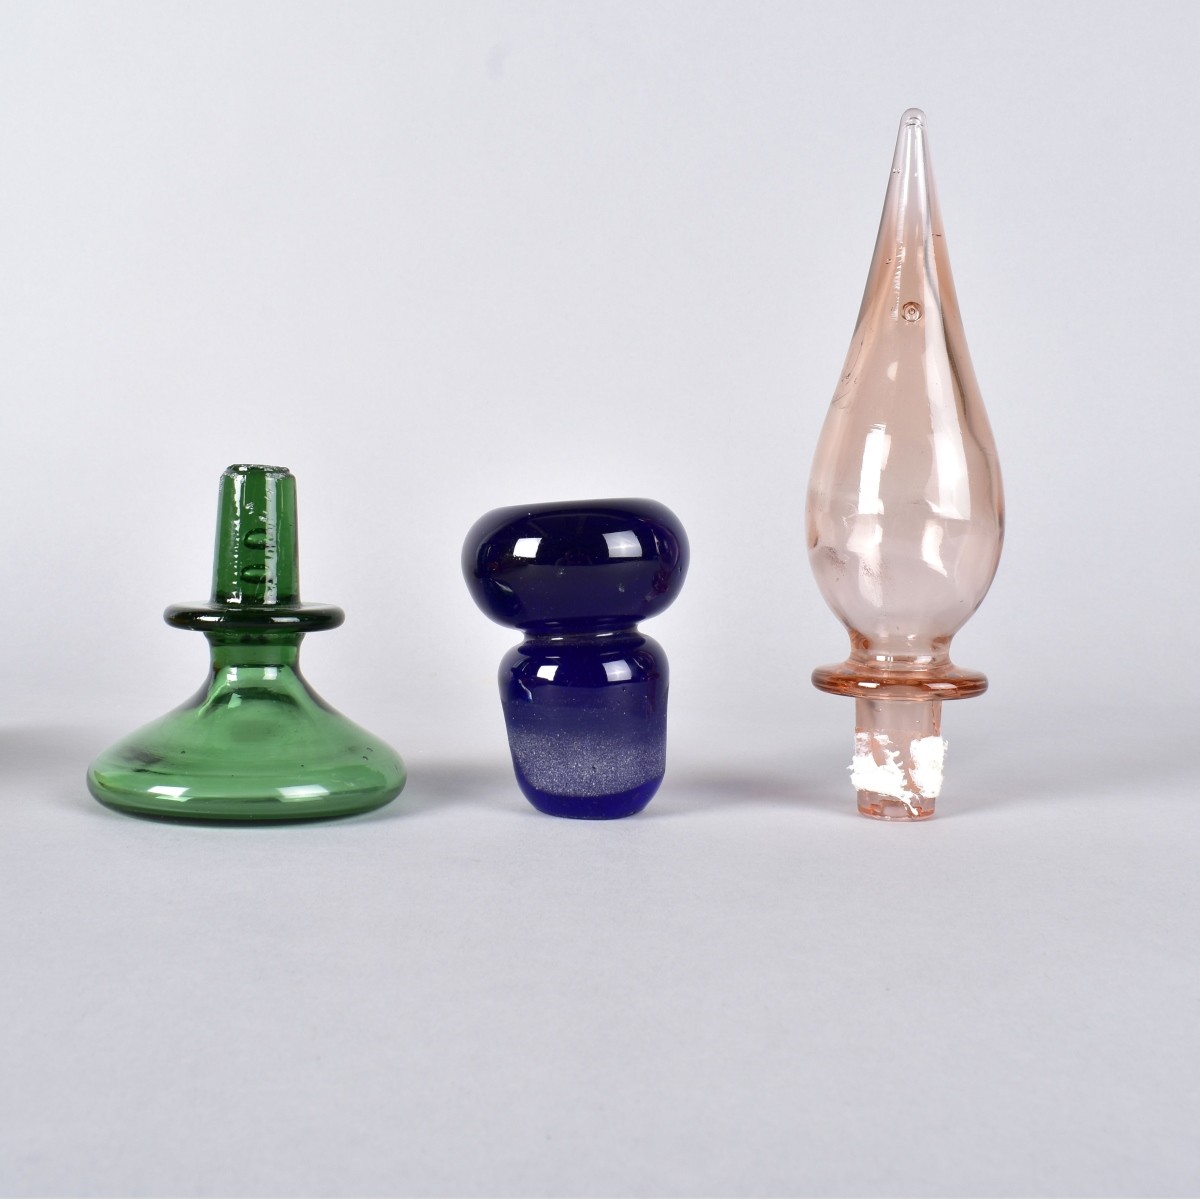 Five (5) Blinko Glass Stoppers